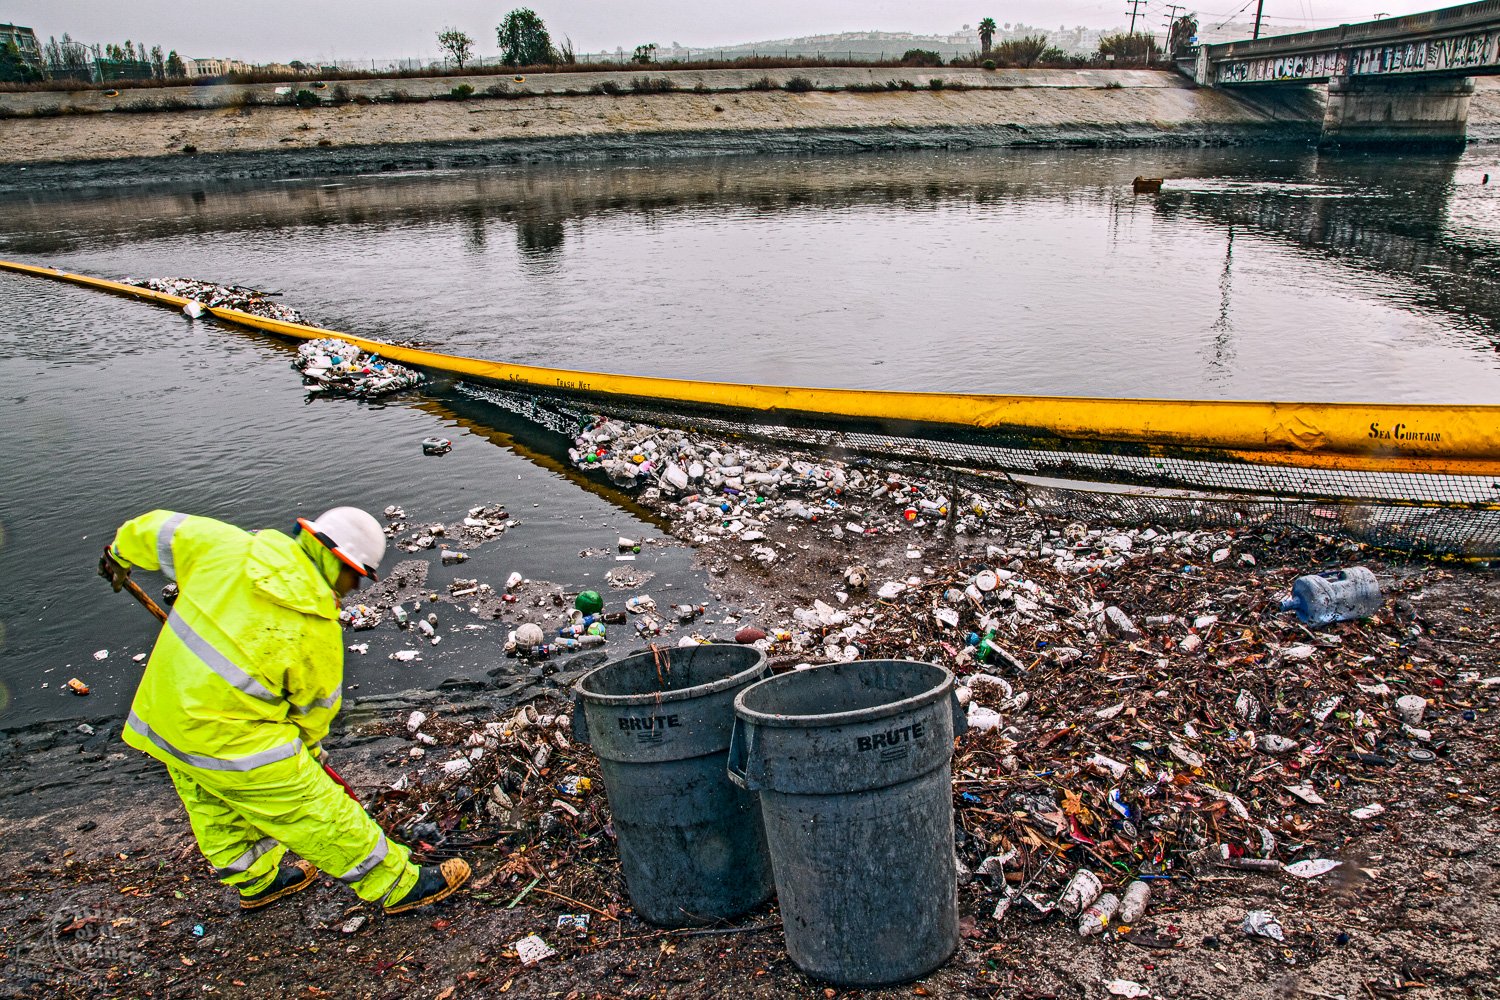  Department of Public Works workers clean up garbage that accumulates in Trash Net boom at the mouth of the Ballona Creek after first rainfall of the year. 